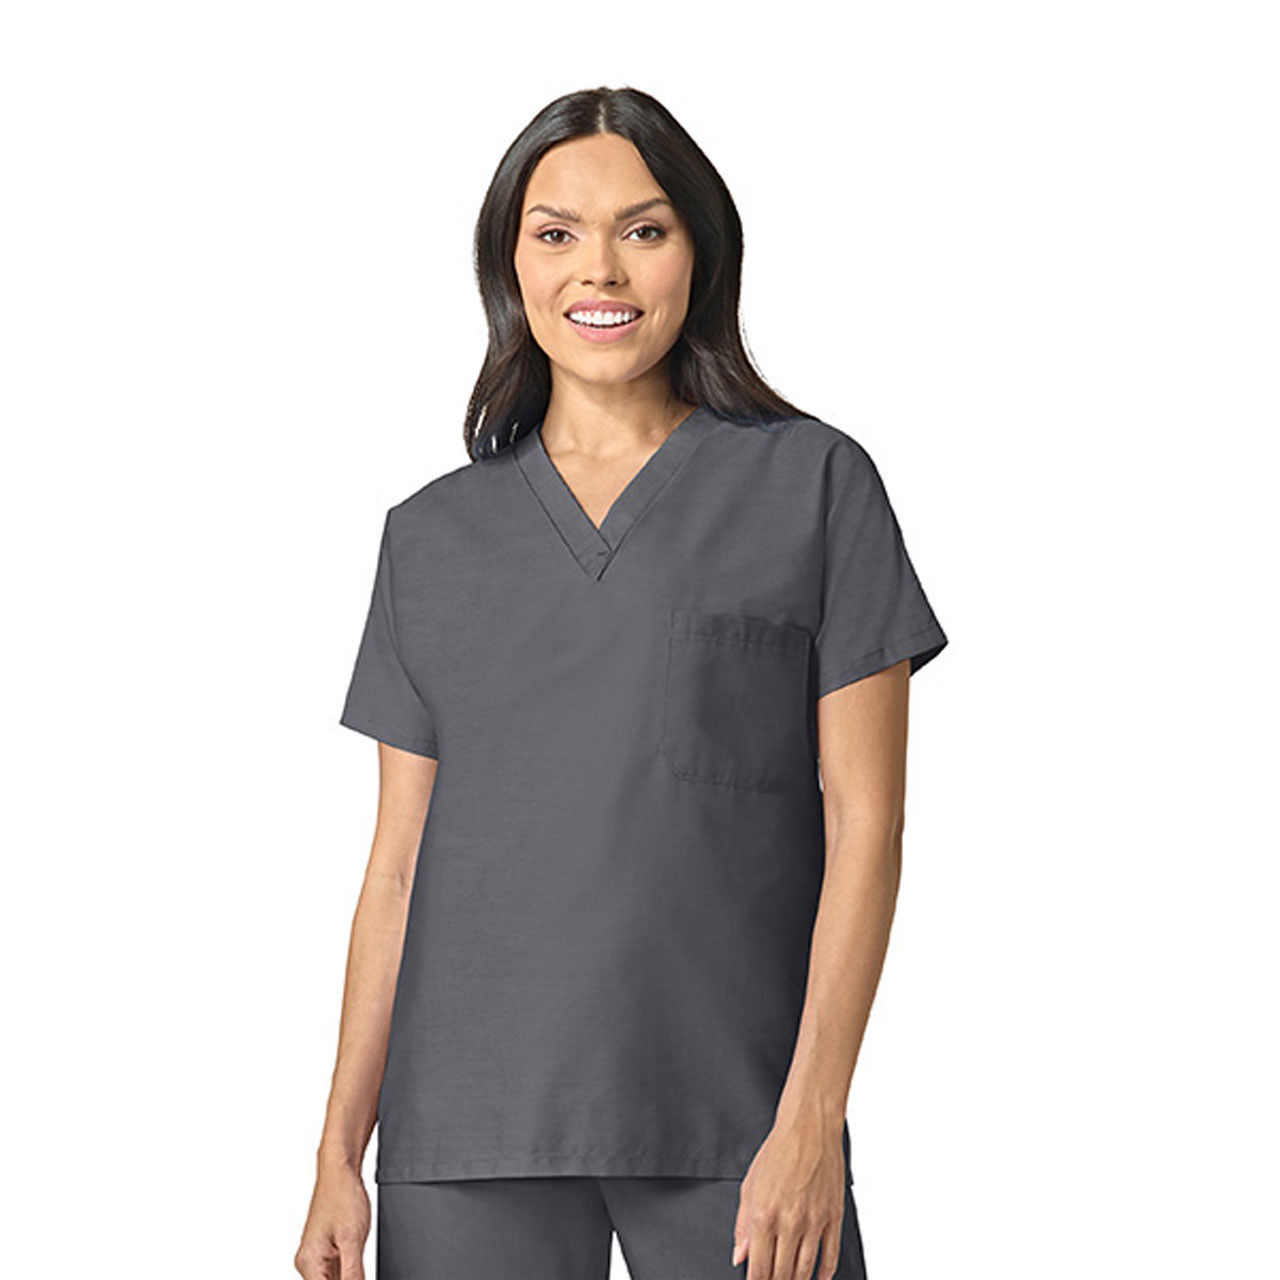 How is the durability of the v-neck design of the Pewter Gray Scrub Top?